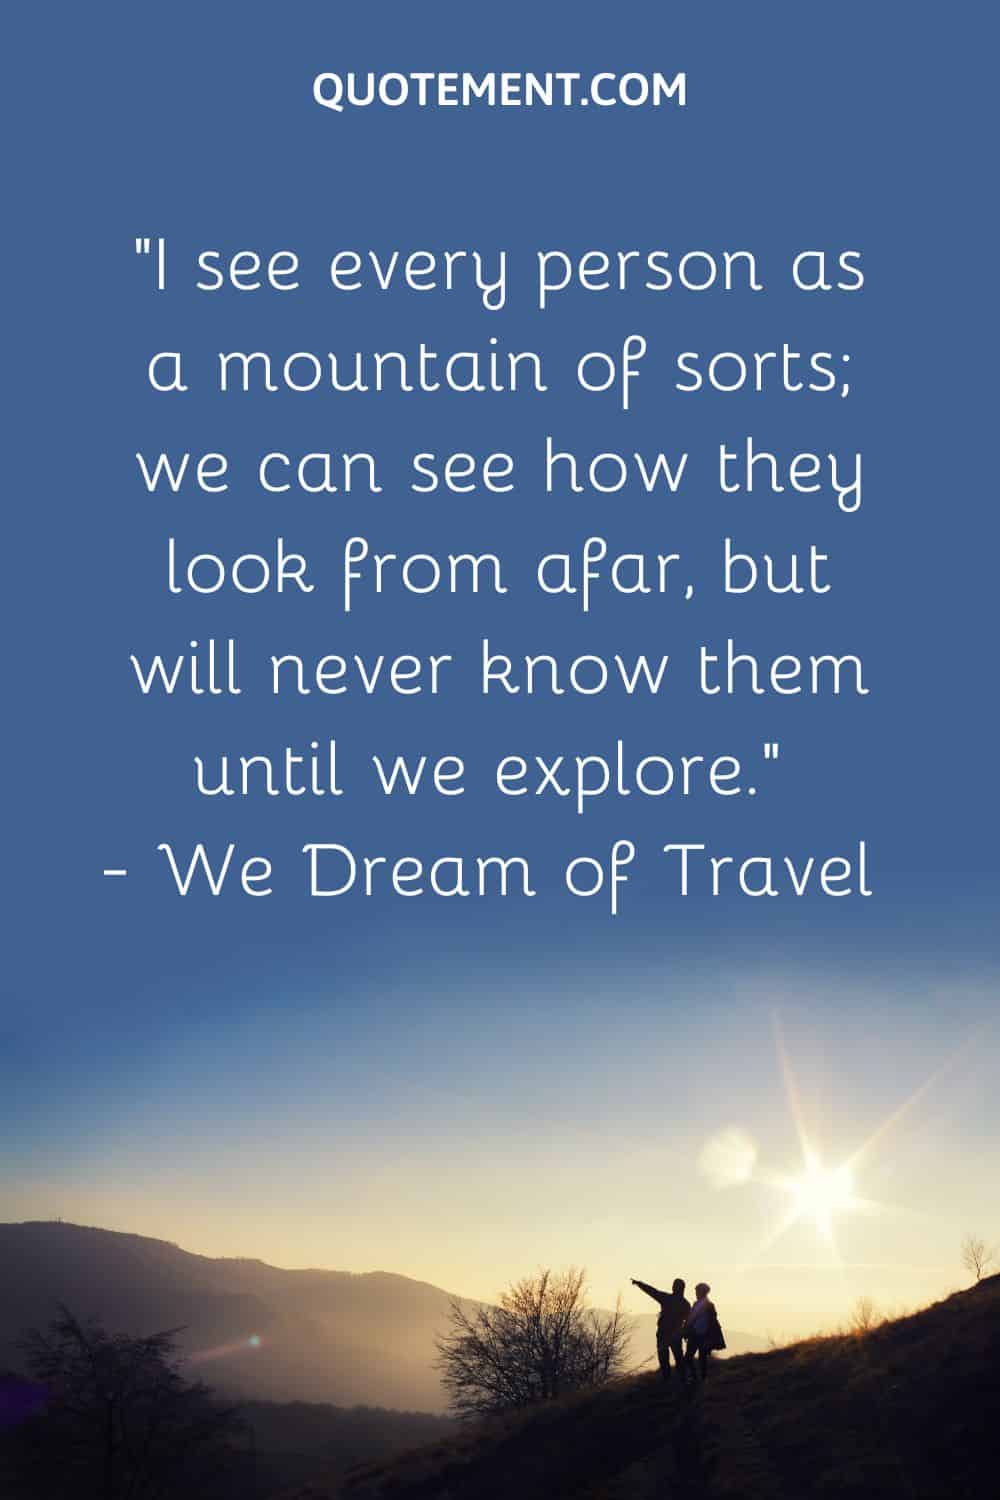 “I see every person as a mountain of sorts; we can see how they look from afar, but will never know them until we explore.” — We Dream of Travel